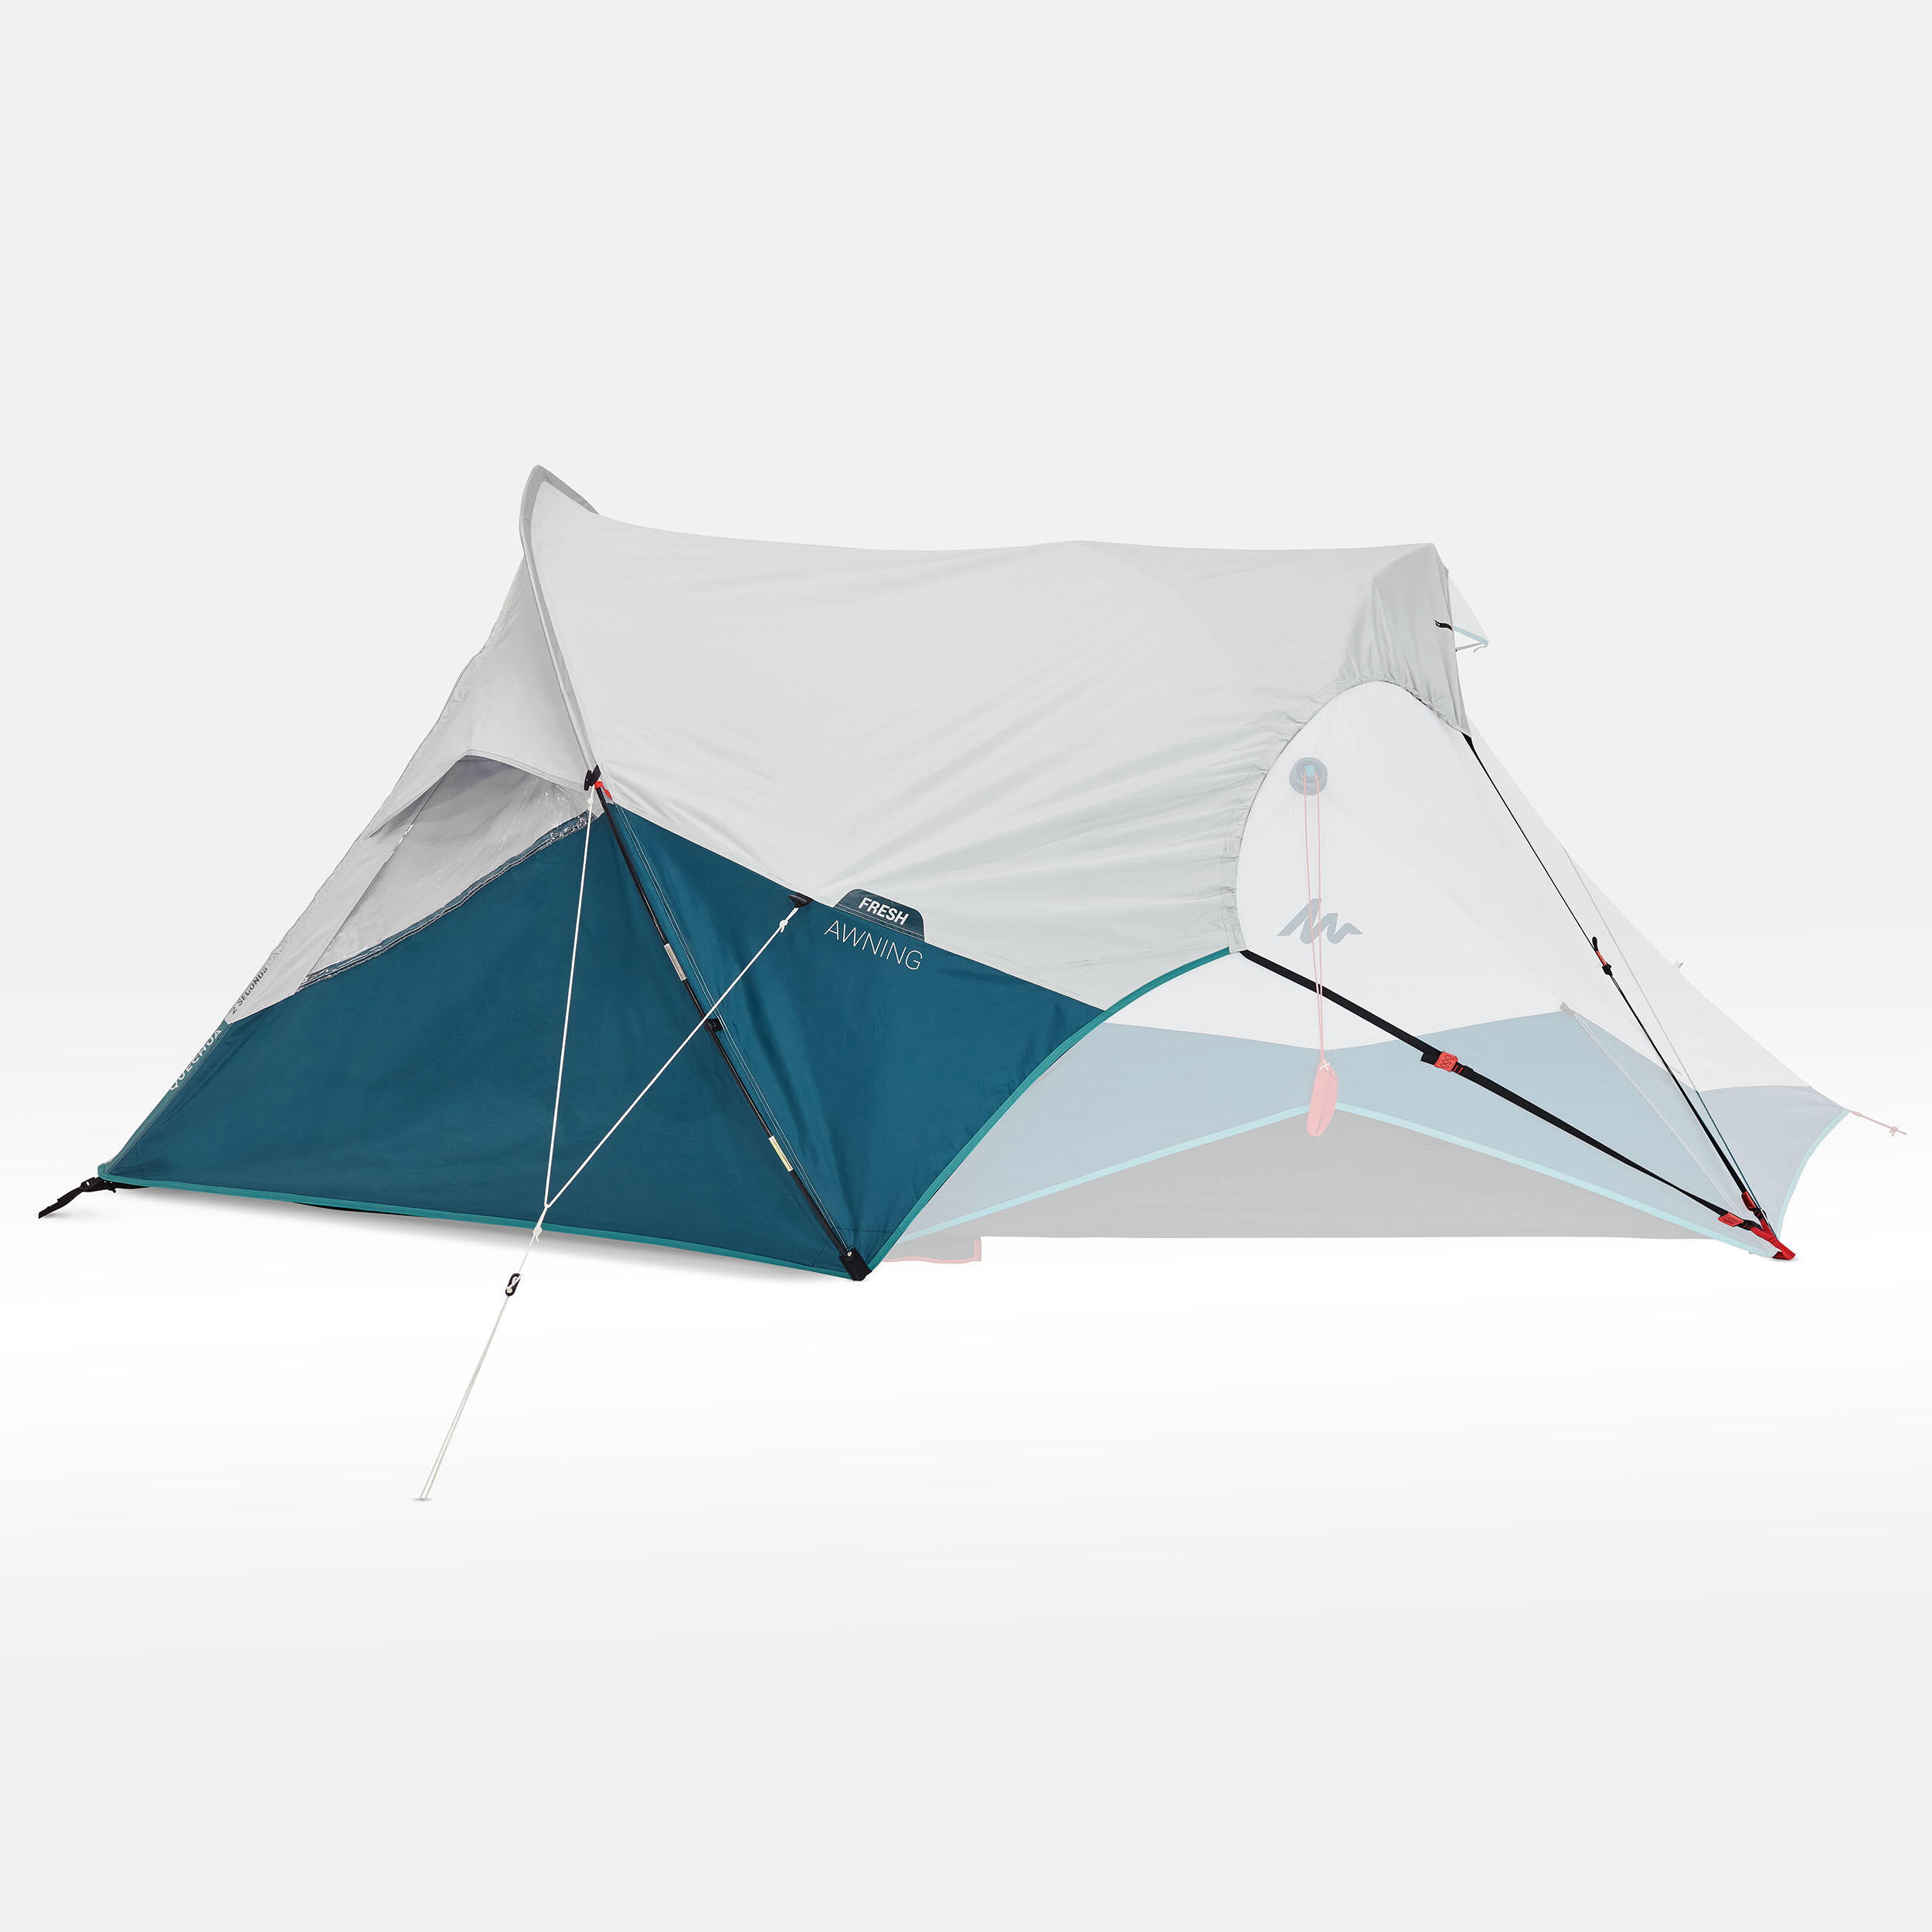 Camping awning - 2 Seconds EASY - Fresh 7/20